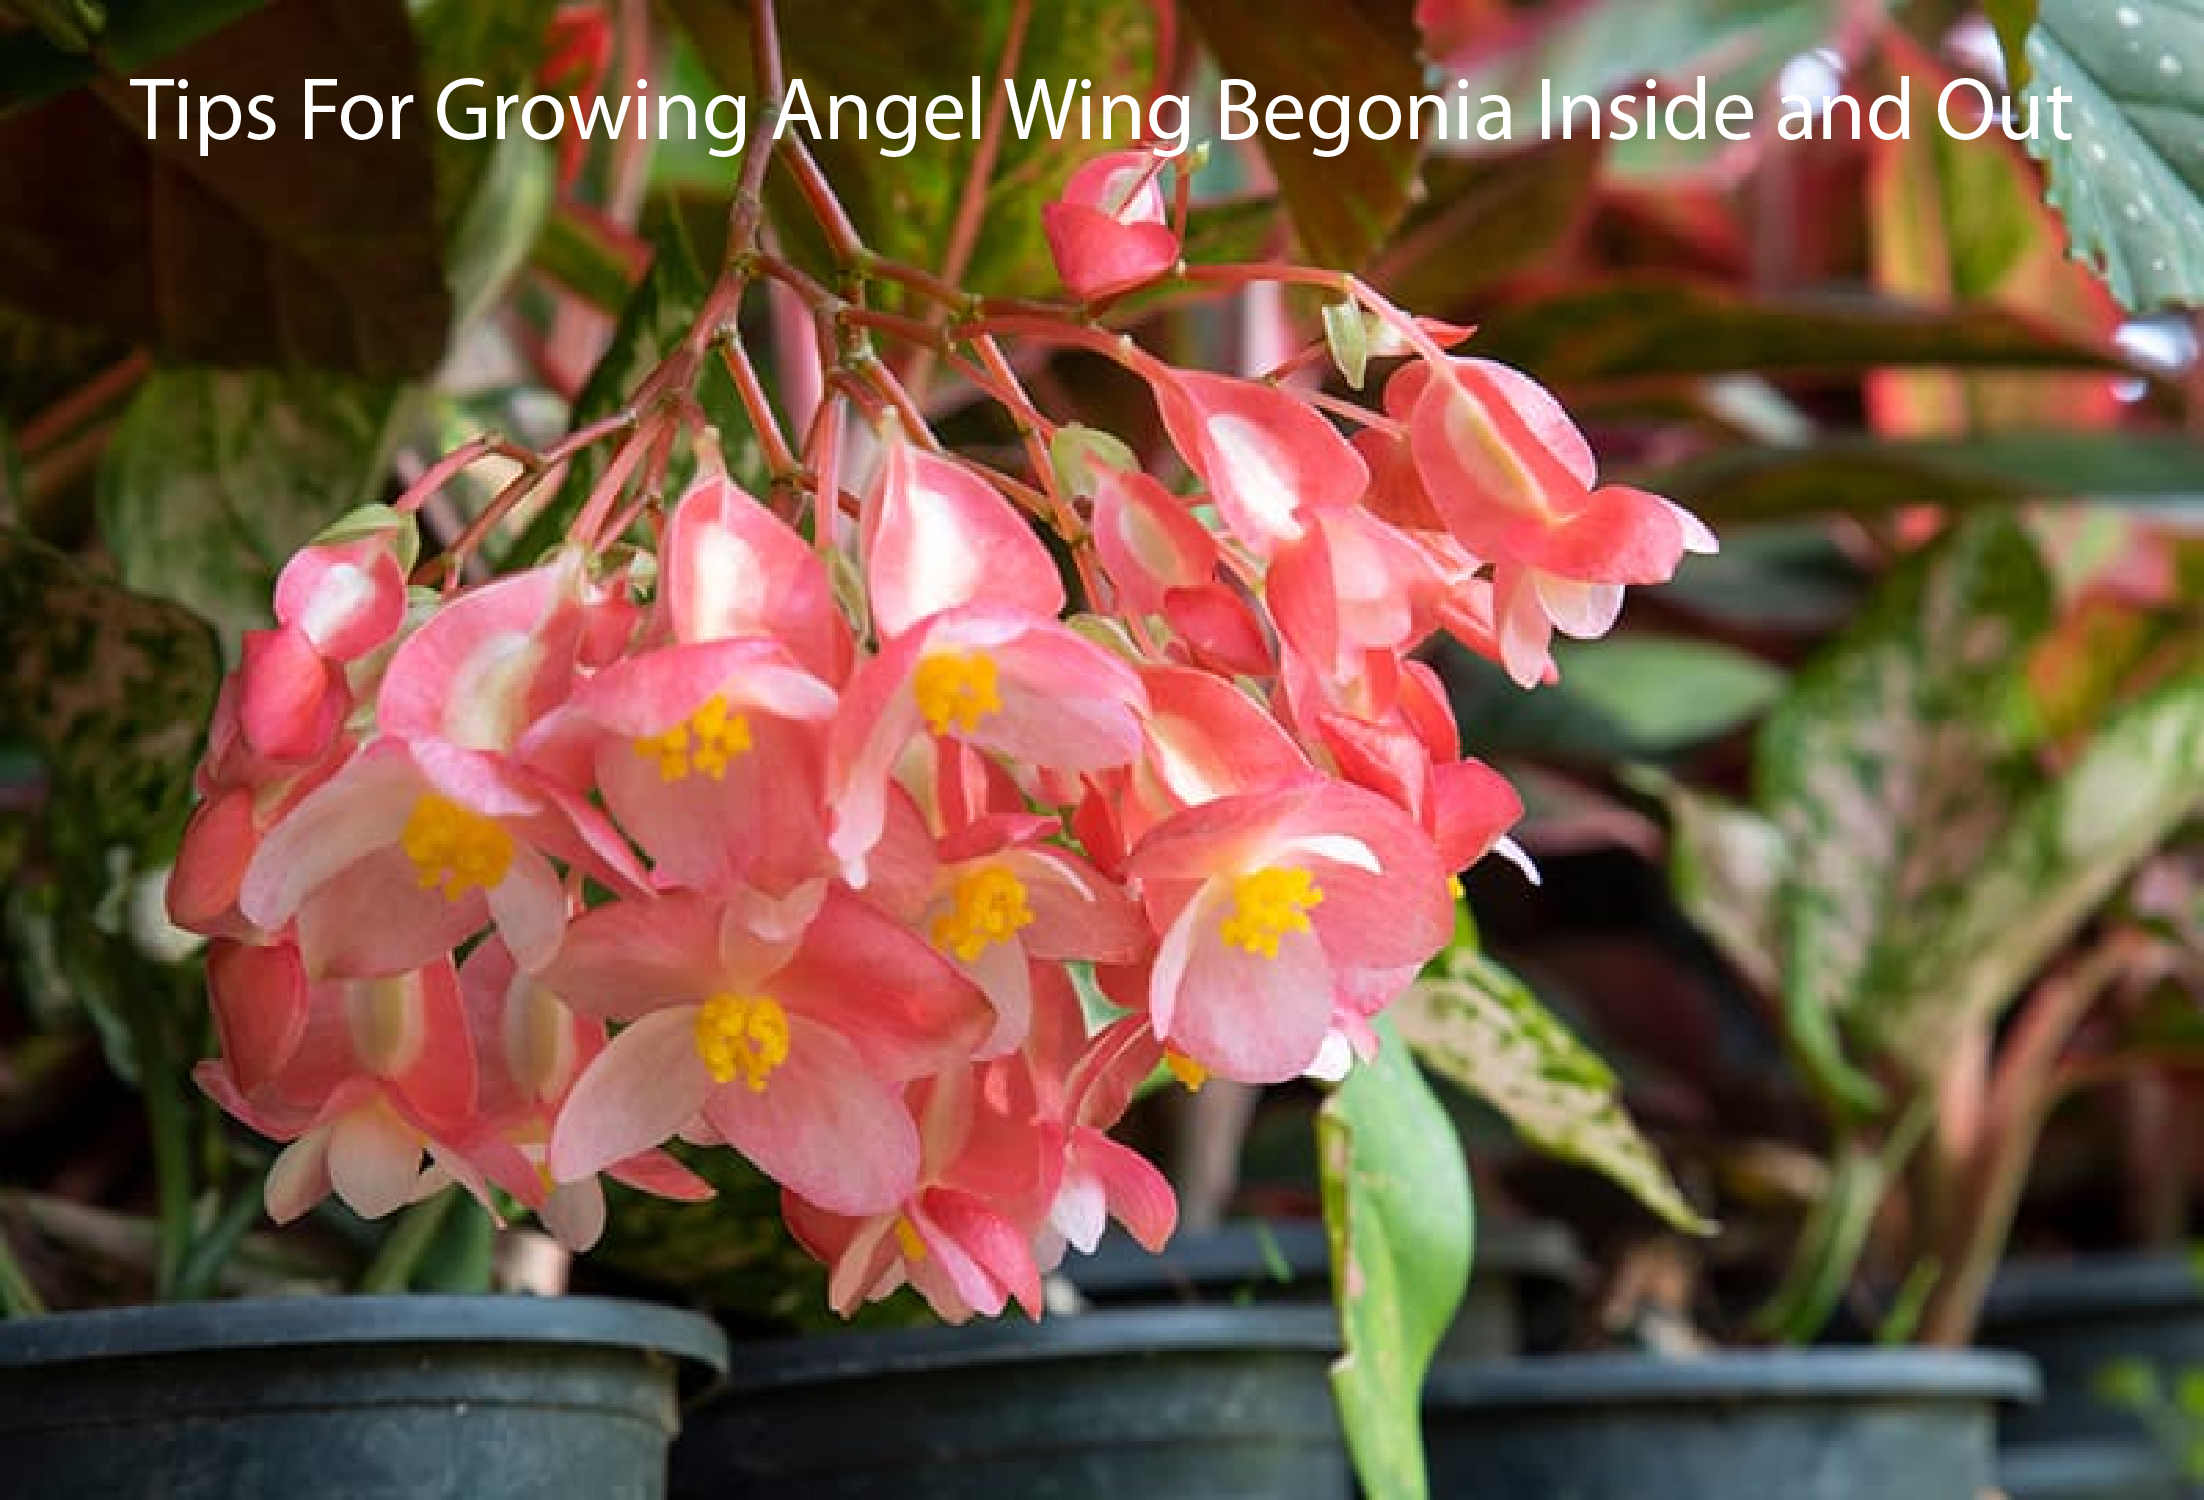 Tips For Growing Angel Wing Begonia Inside and Out